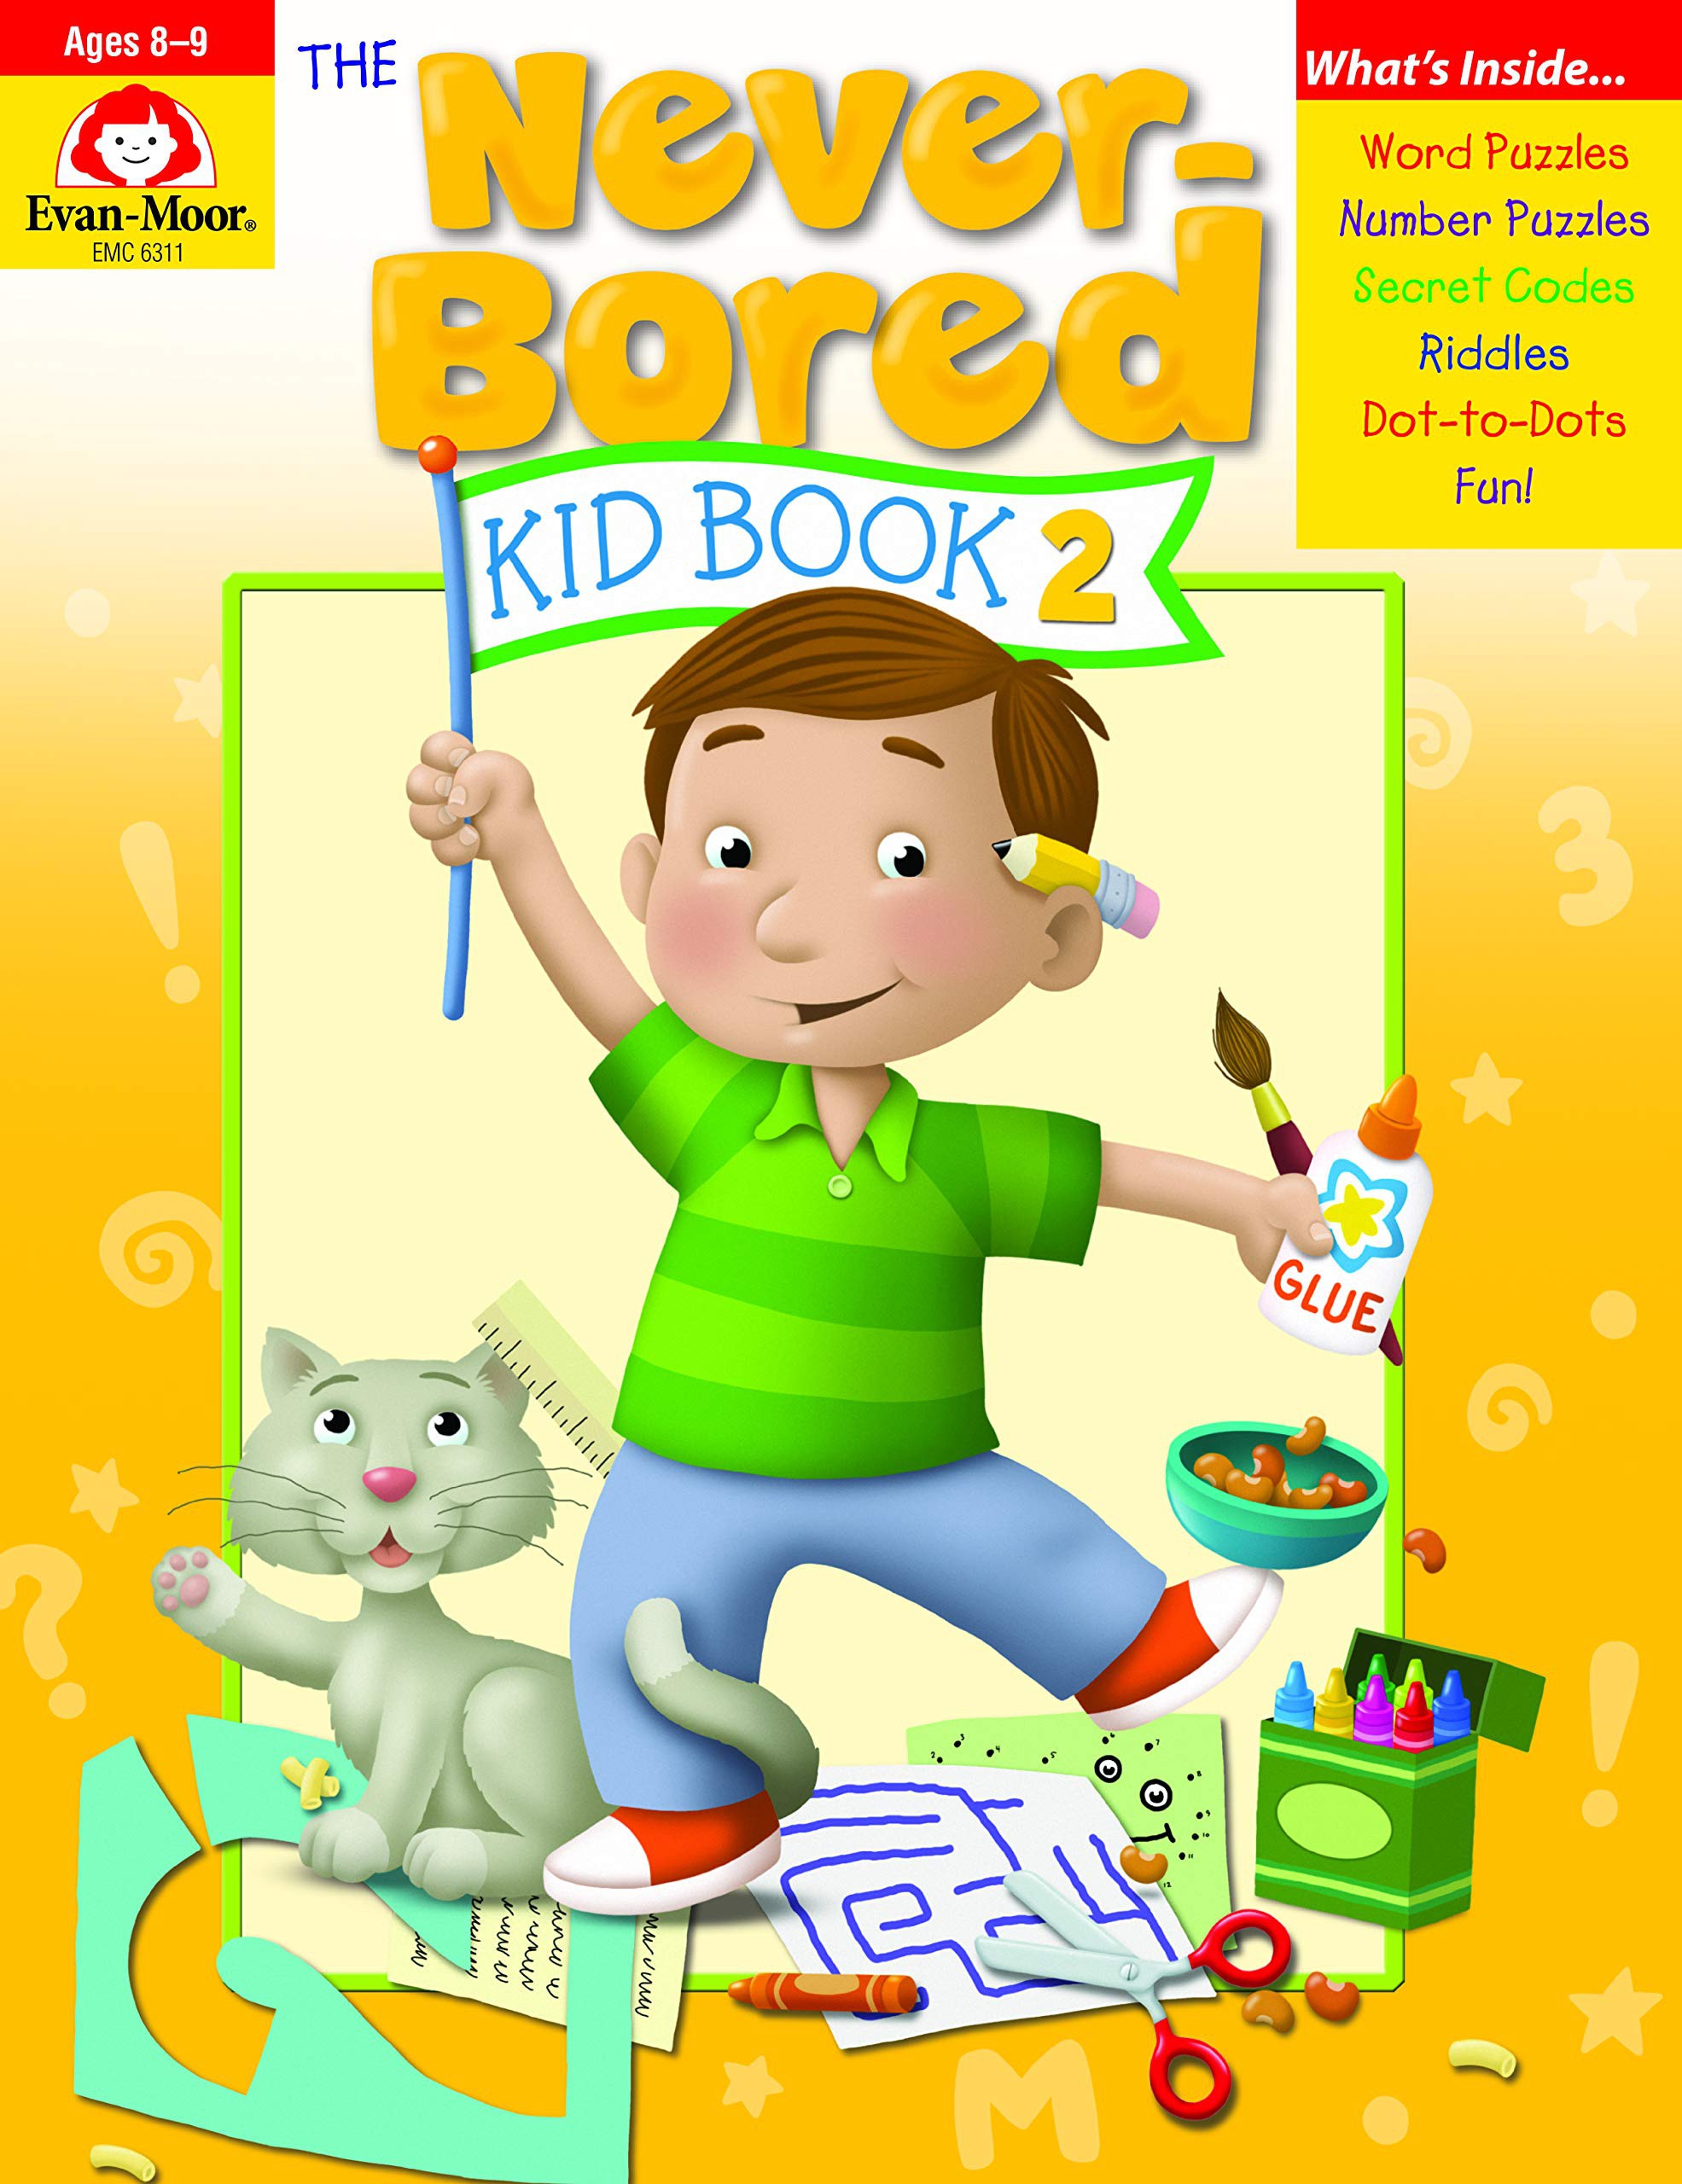 The Never-Bored Kid Book 2, Ages 8-9  Evan-Moor